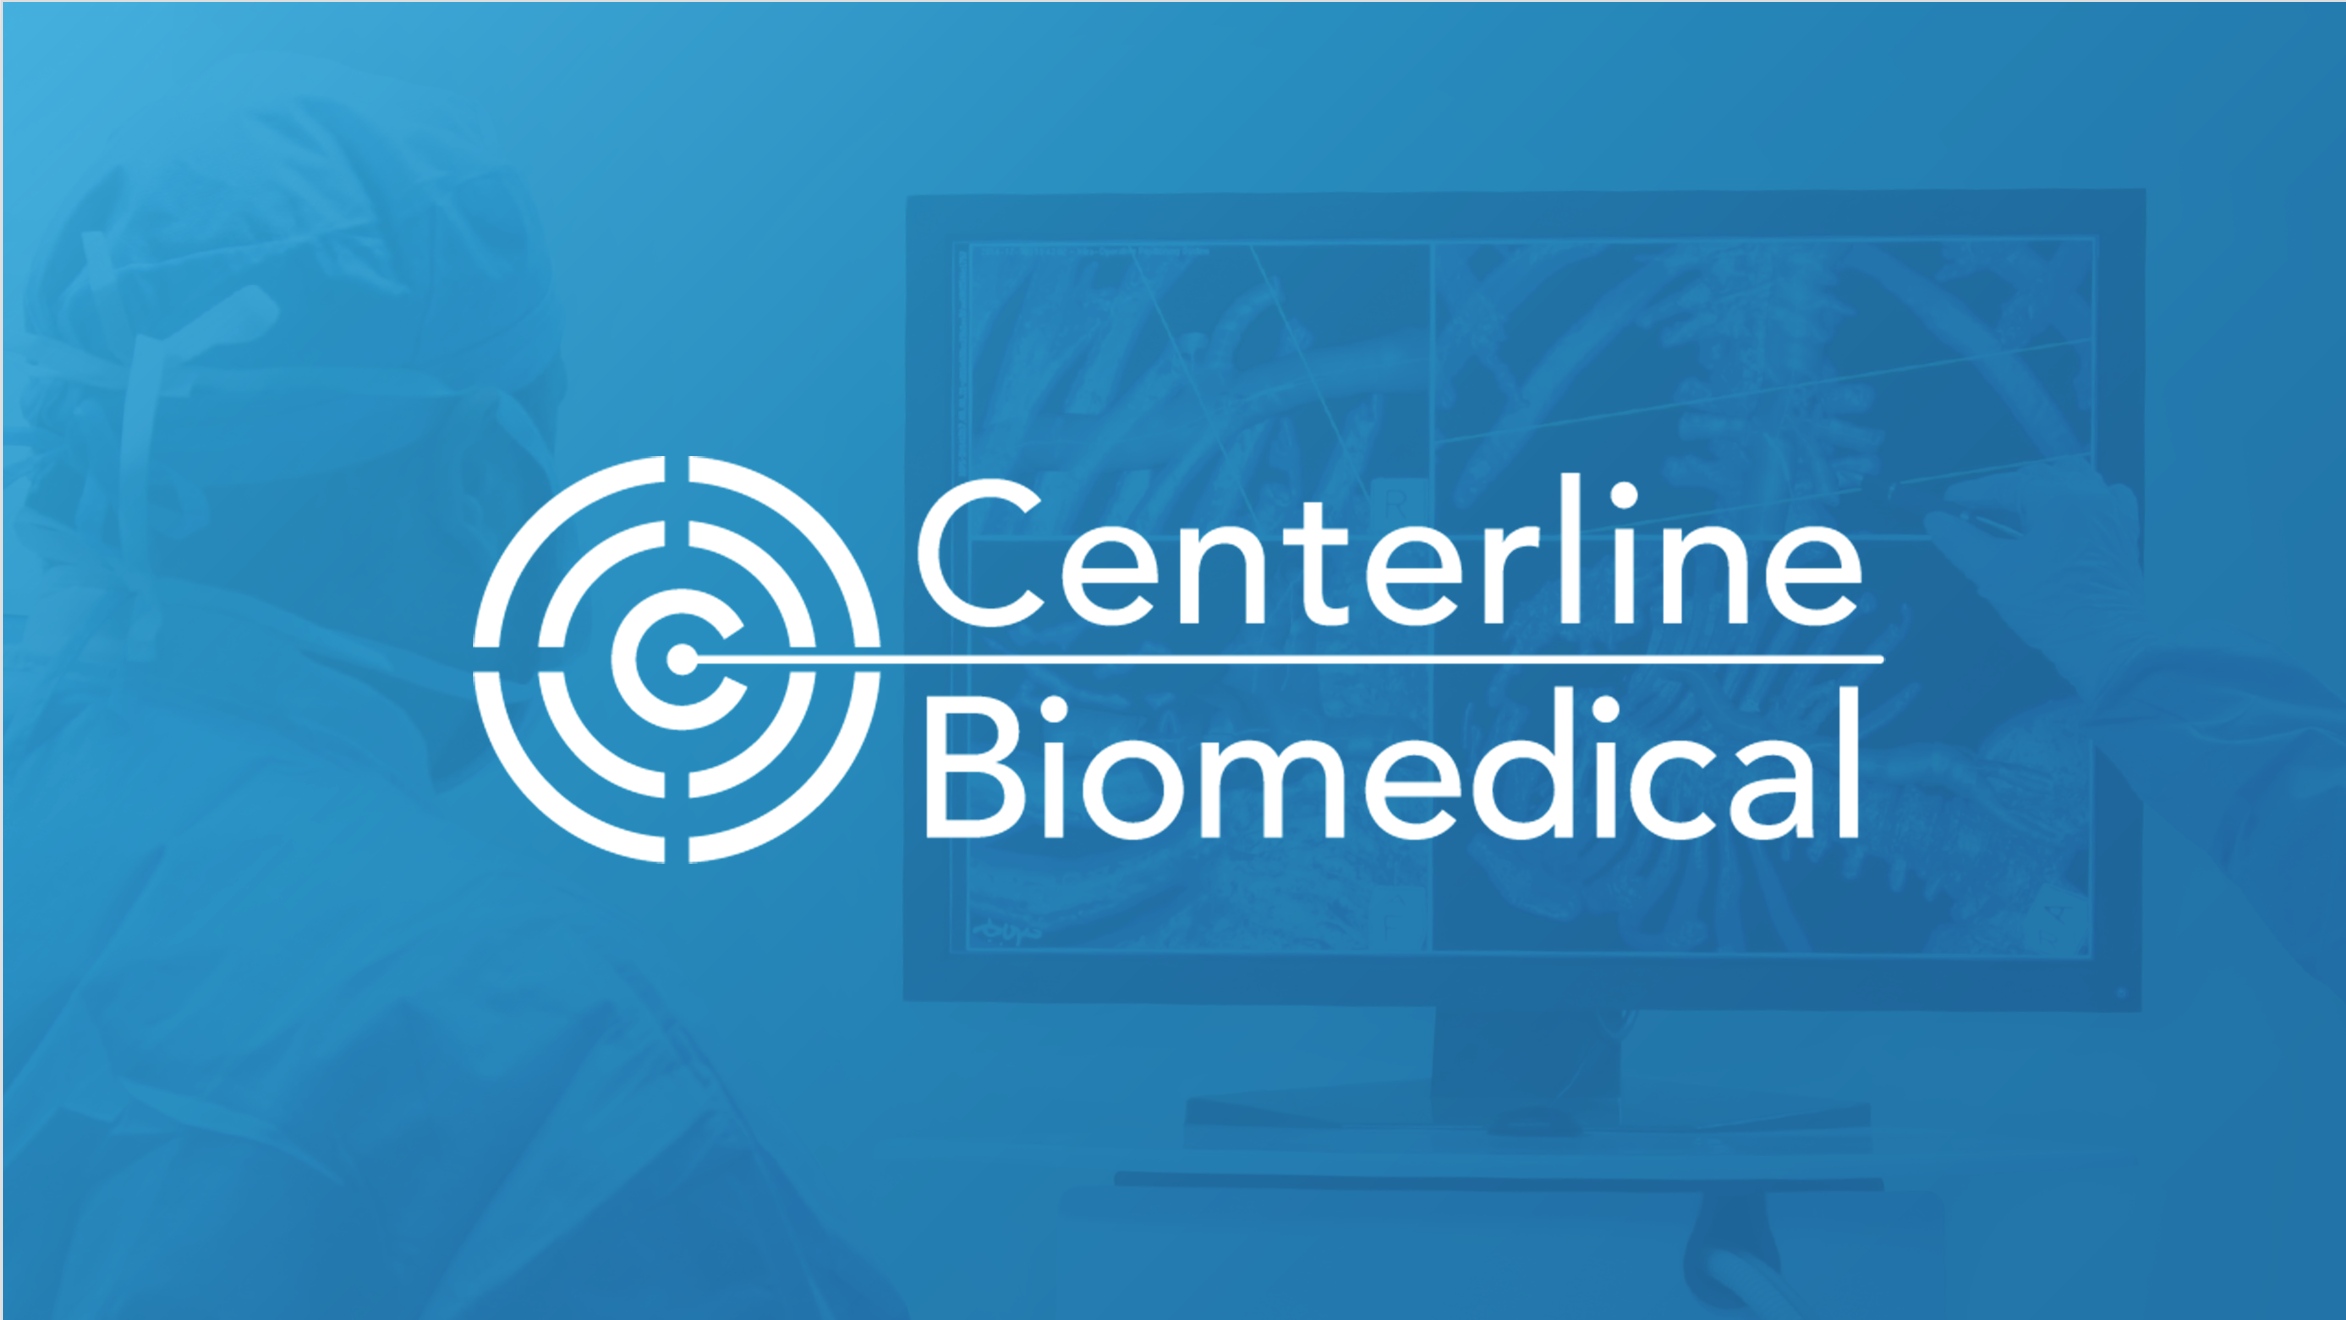 Centerline Biomedical Rounds Up Successful Year With Series A Fundraising